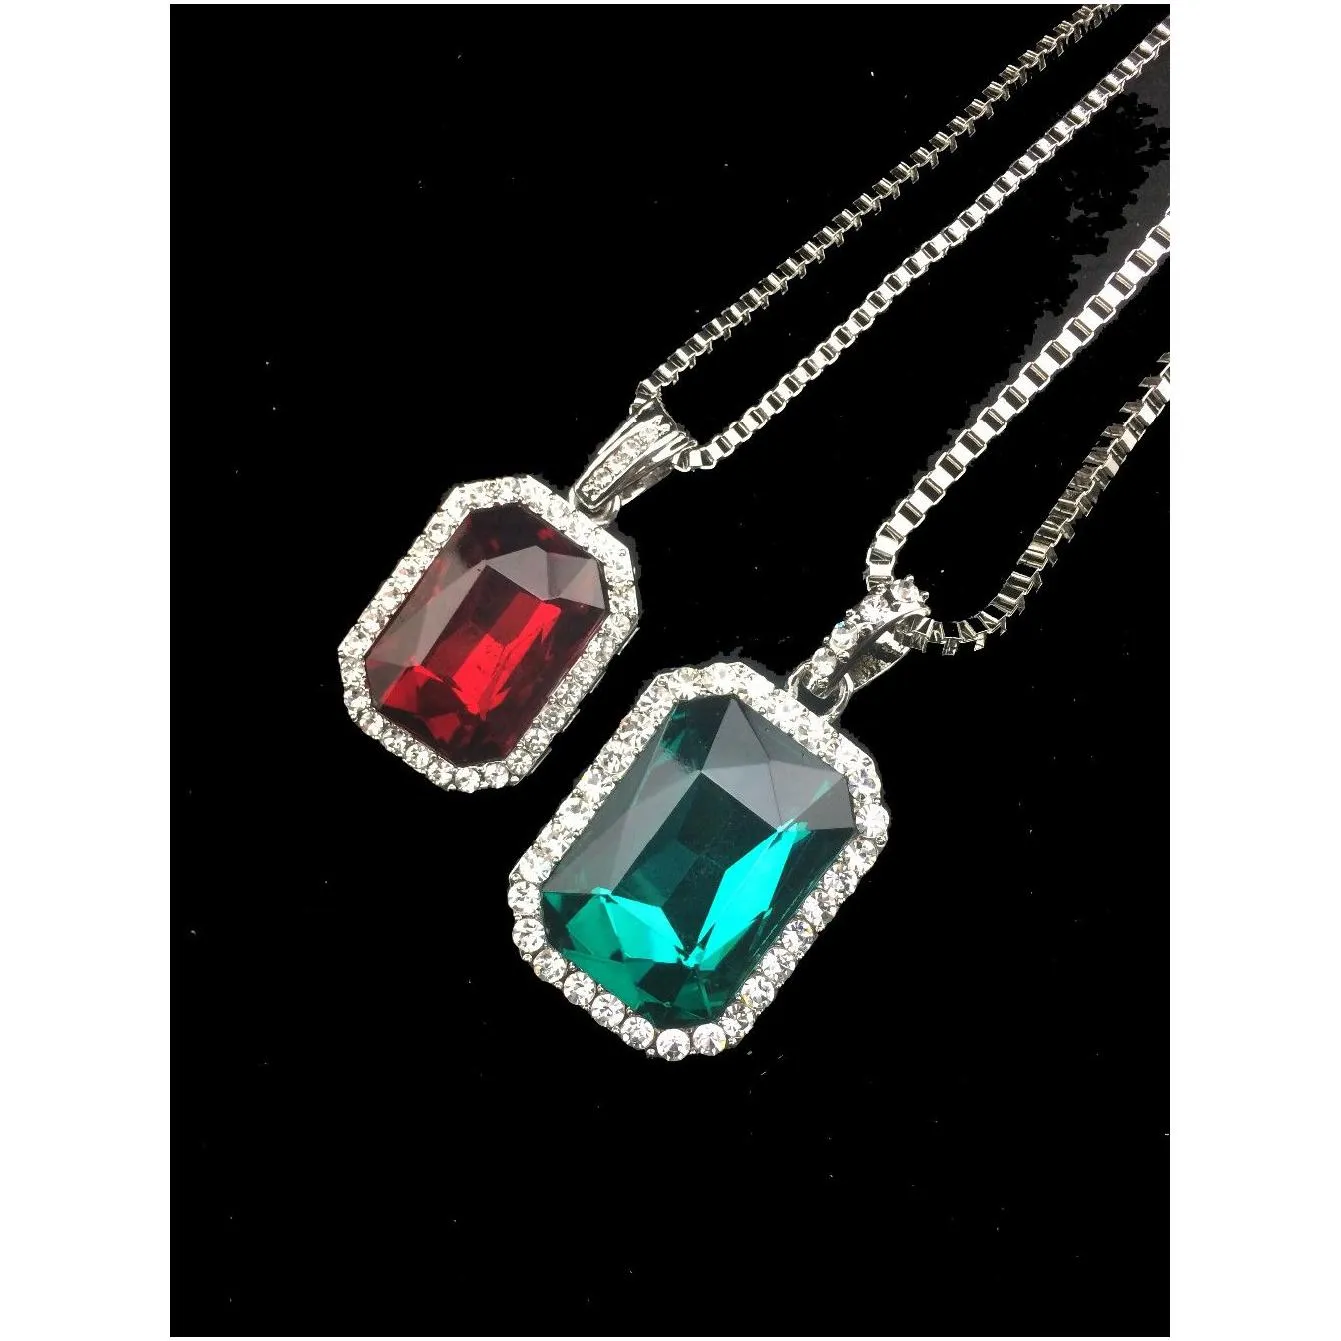 square iced out hip hop jewelry lab diamond pendant necklace set silver stone rapper with chain